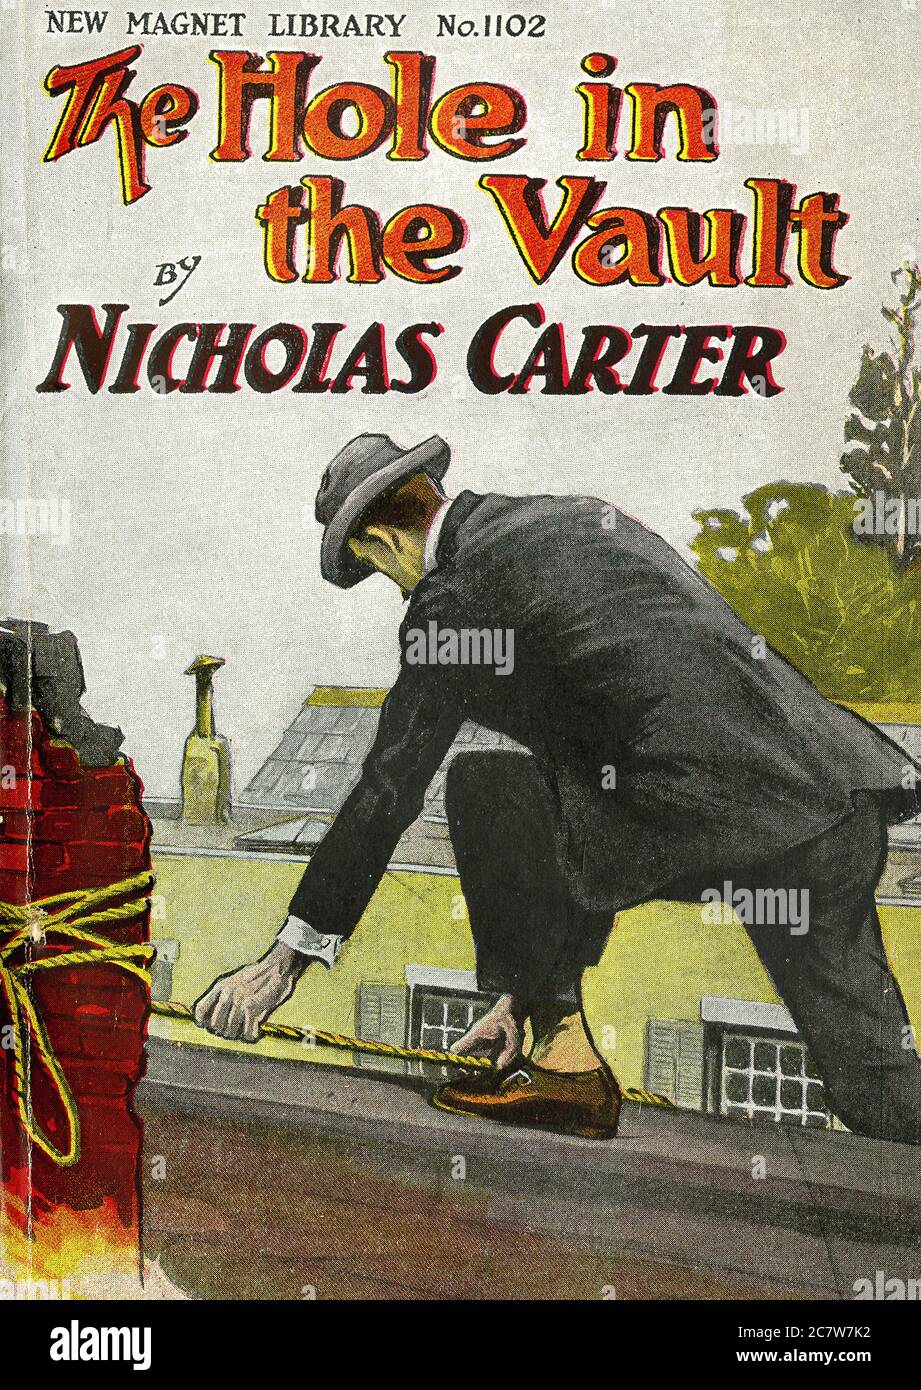 Nicholas Carter - The Hole in the Vault - New Magnet Library - Vintage Pulp Literary Stock Photo